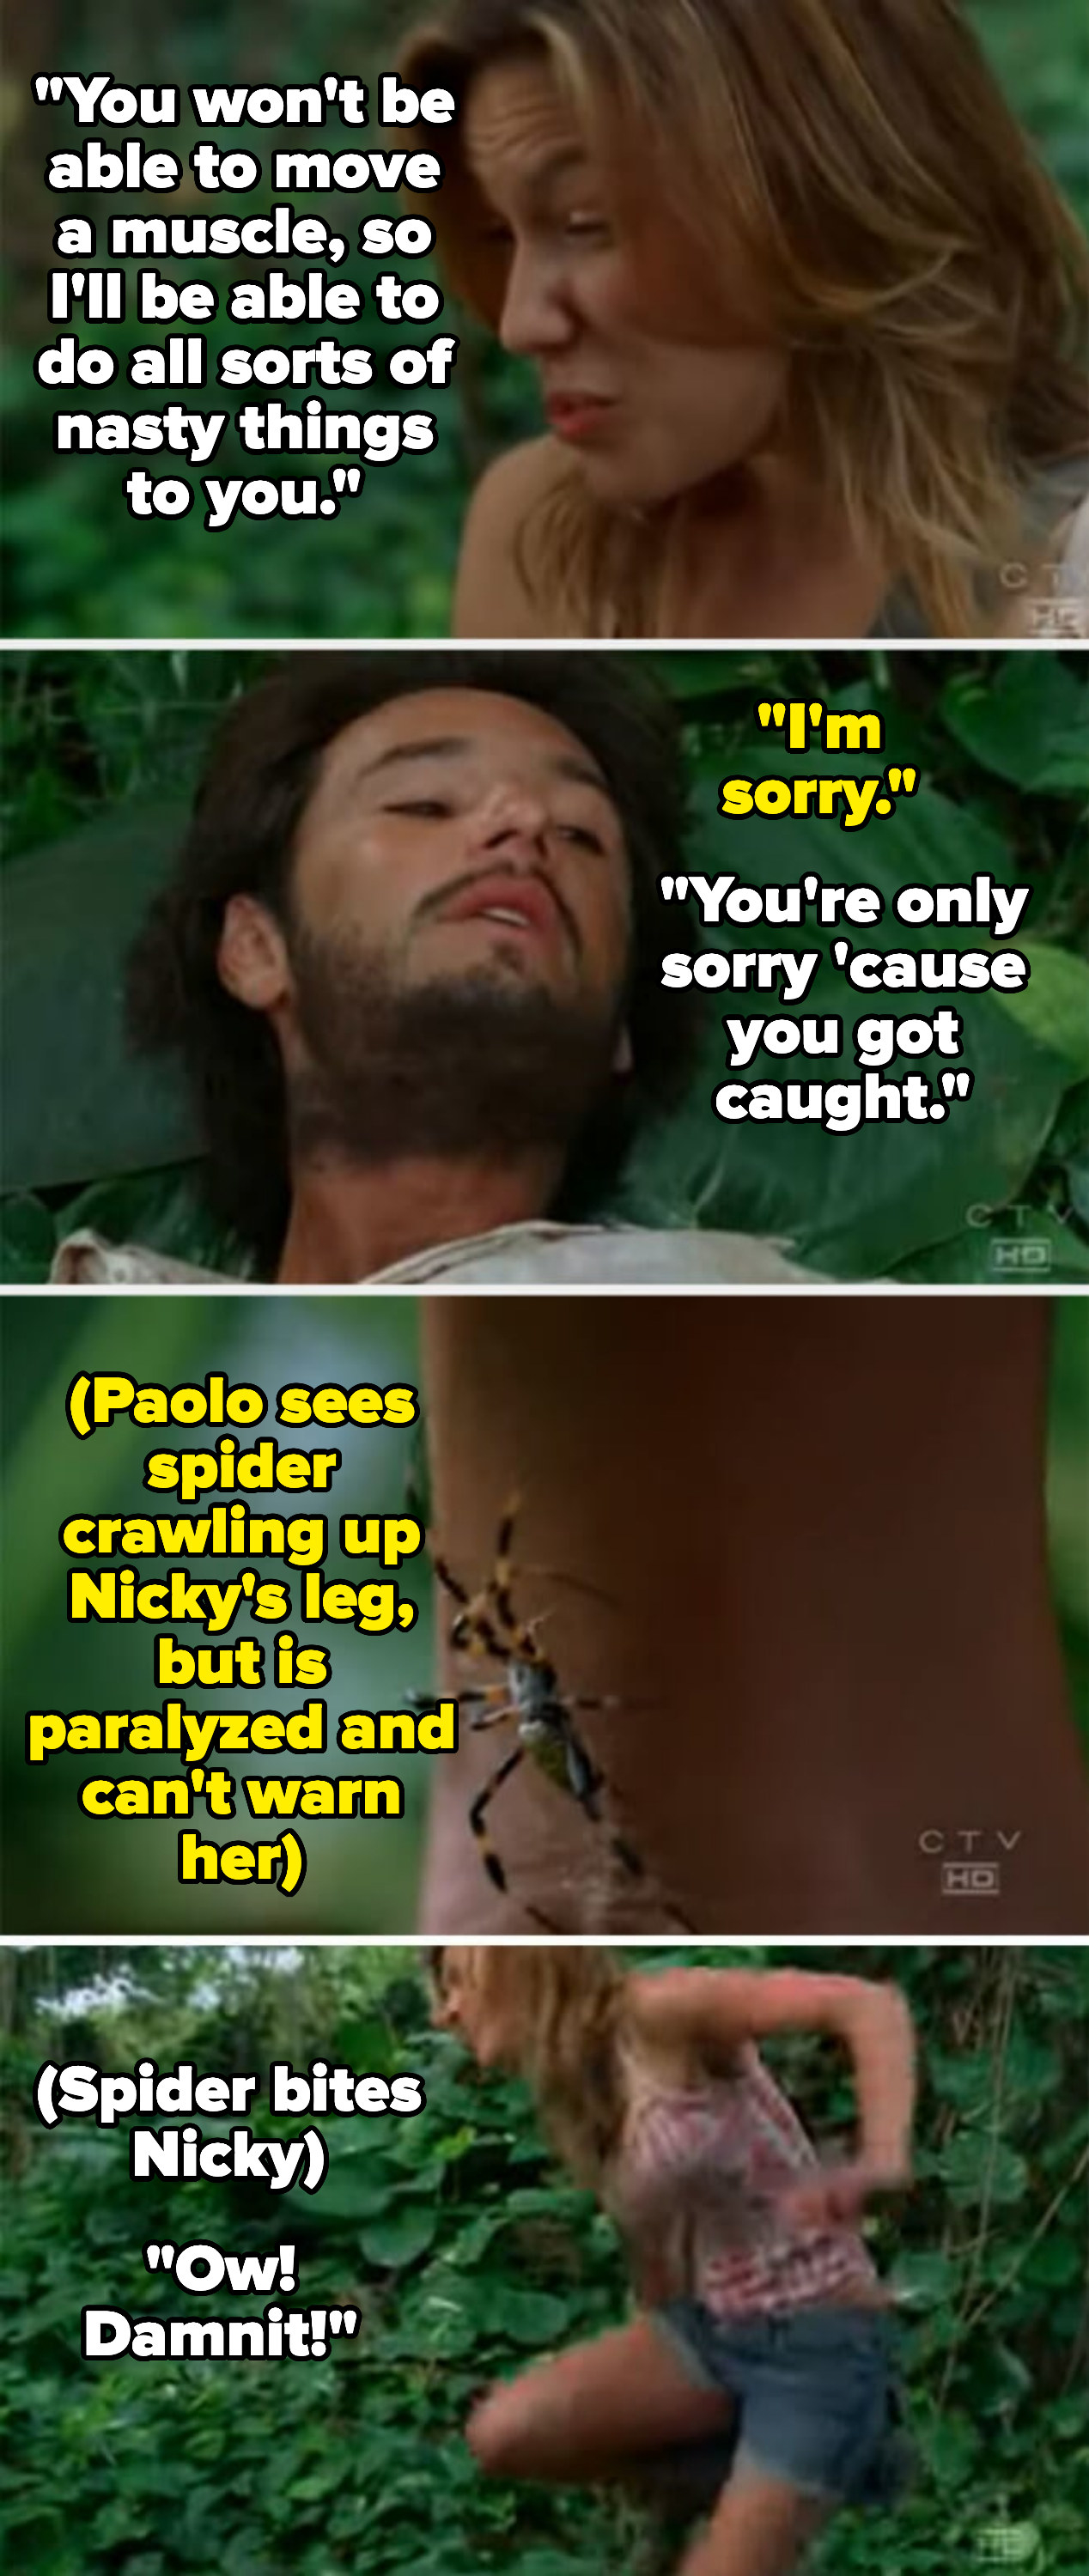 Nicky and Paolo are confronted by a spider